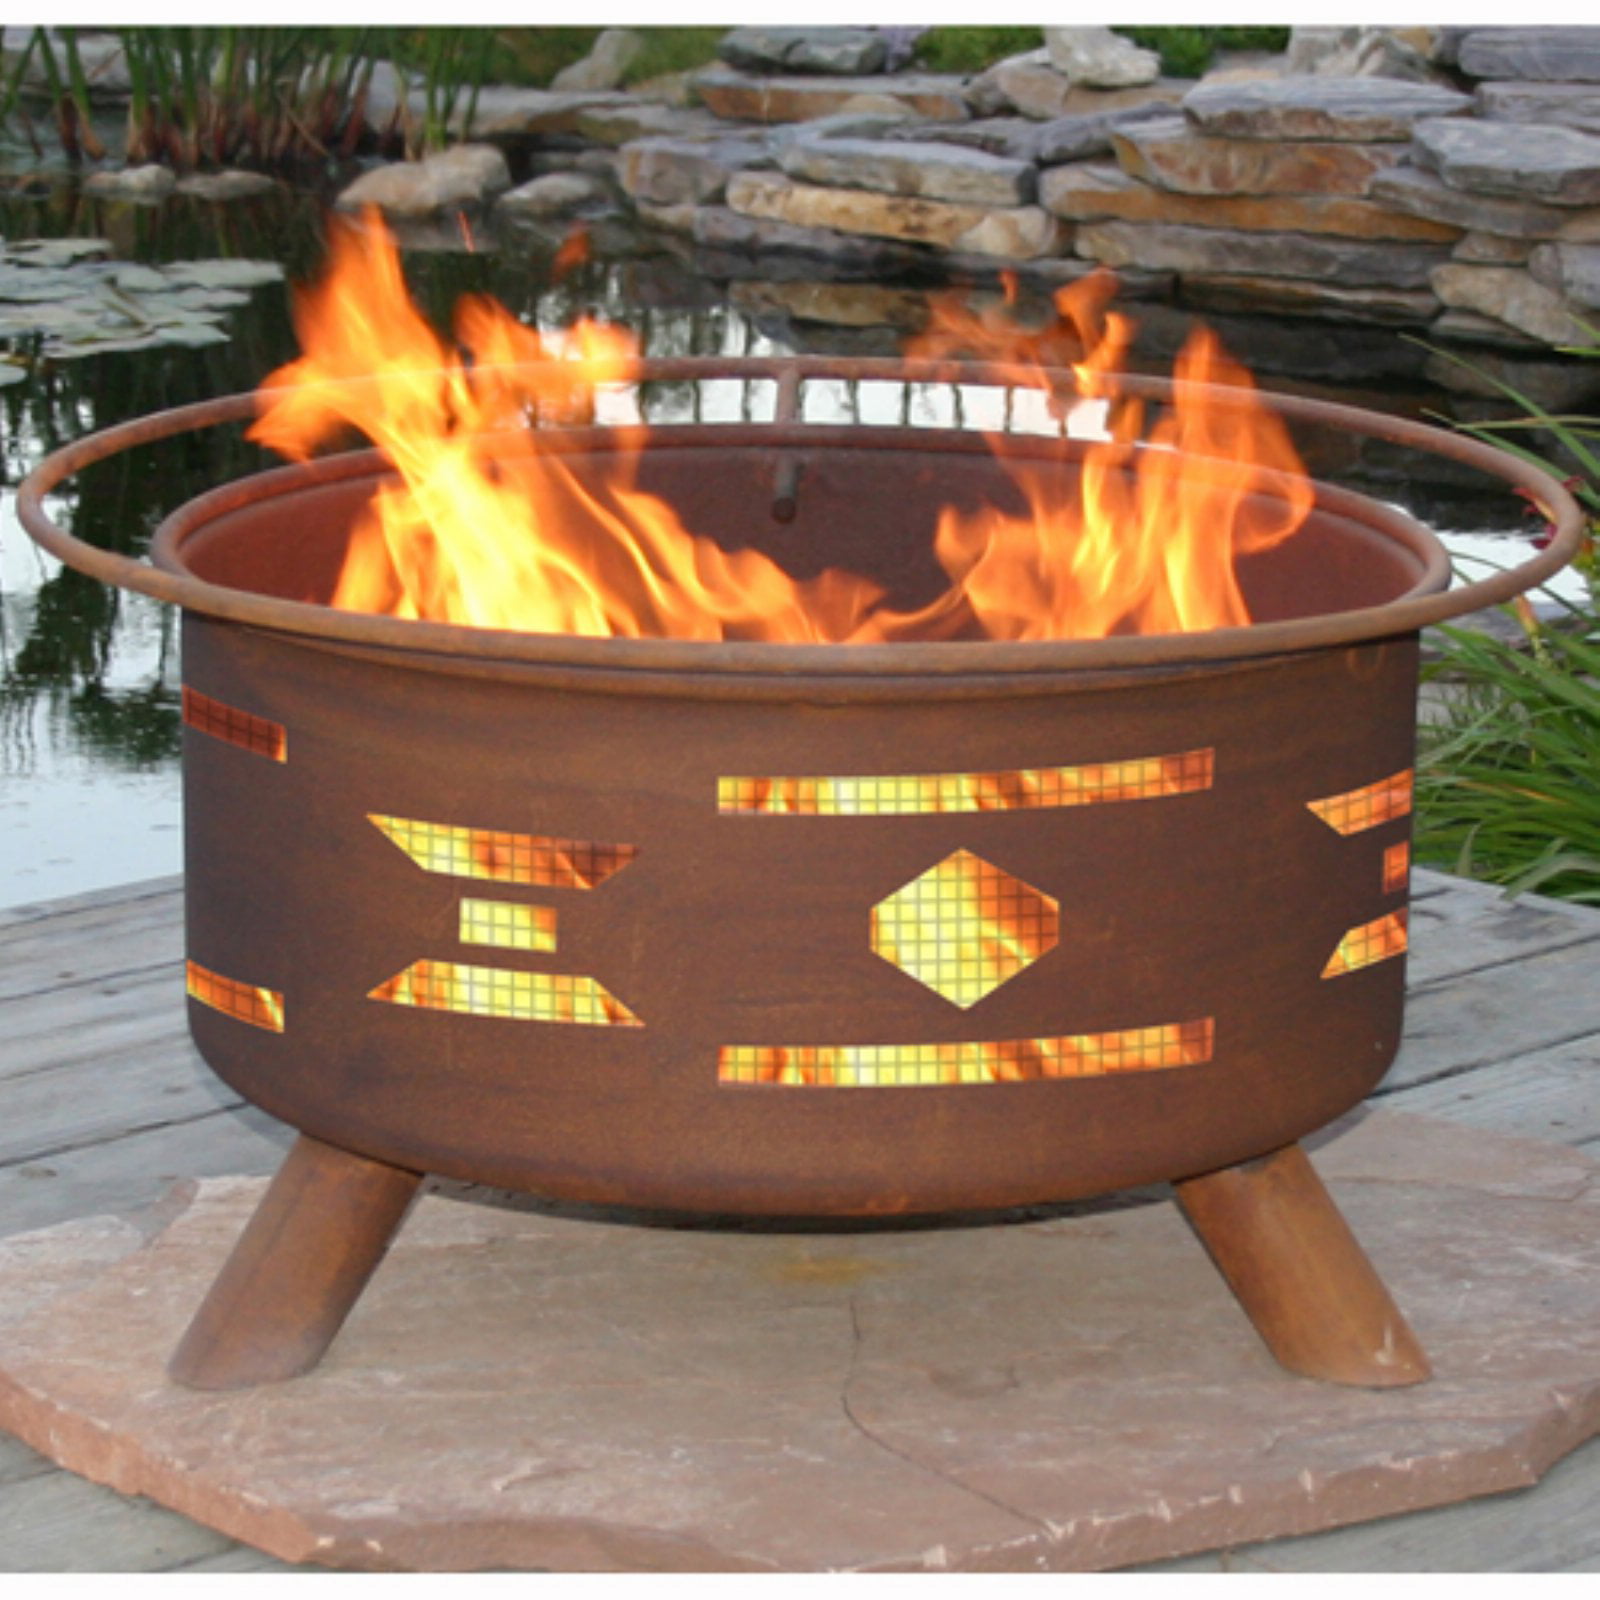 Oklahoma Sooners Fire Pit Com, Oklahoma State Fire Pit